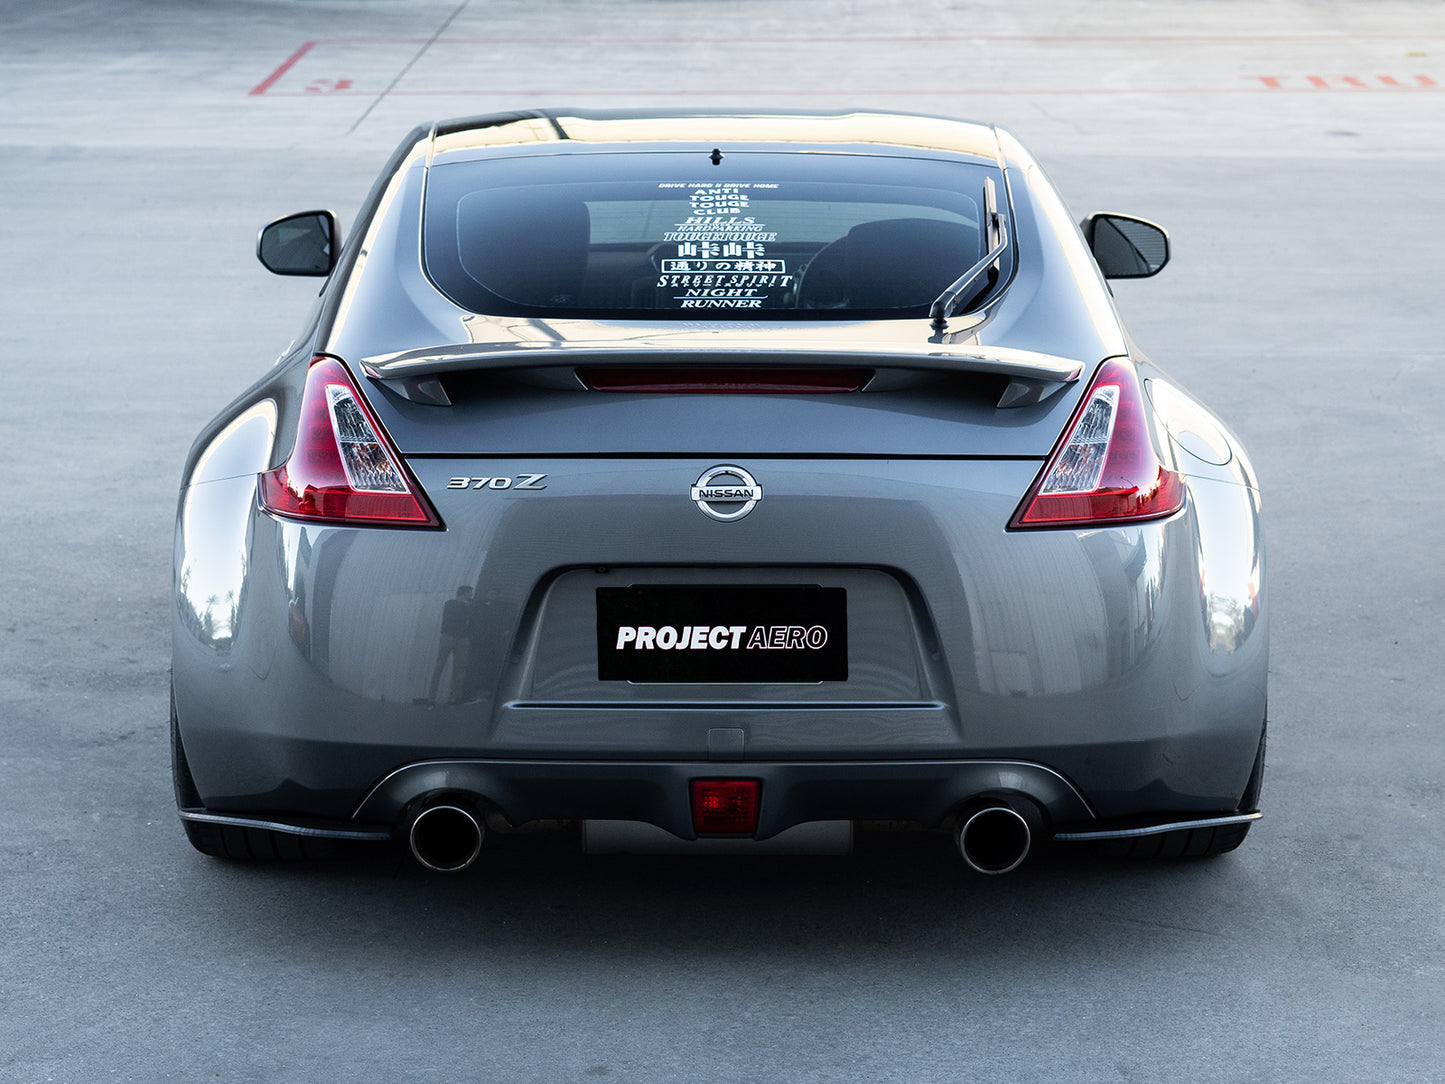 370z Project Aero rear spats/pods compliment the OEM factory rear bumper for a more subtle yet aggressive look